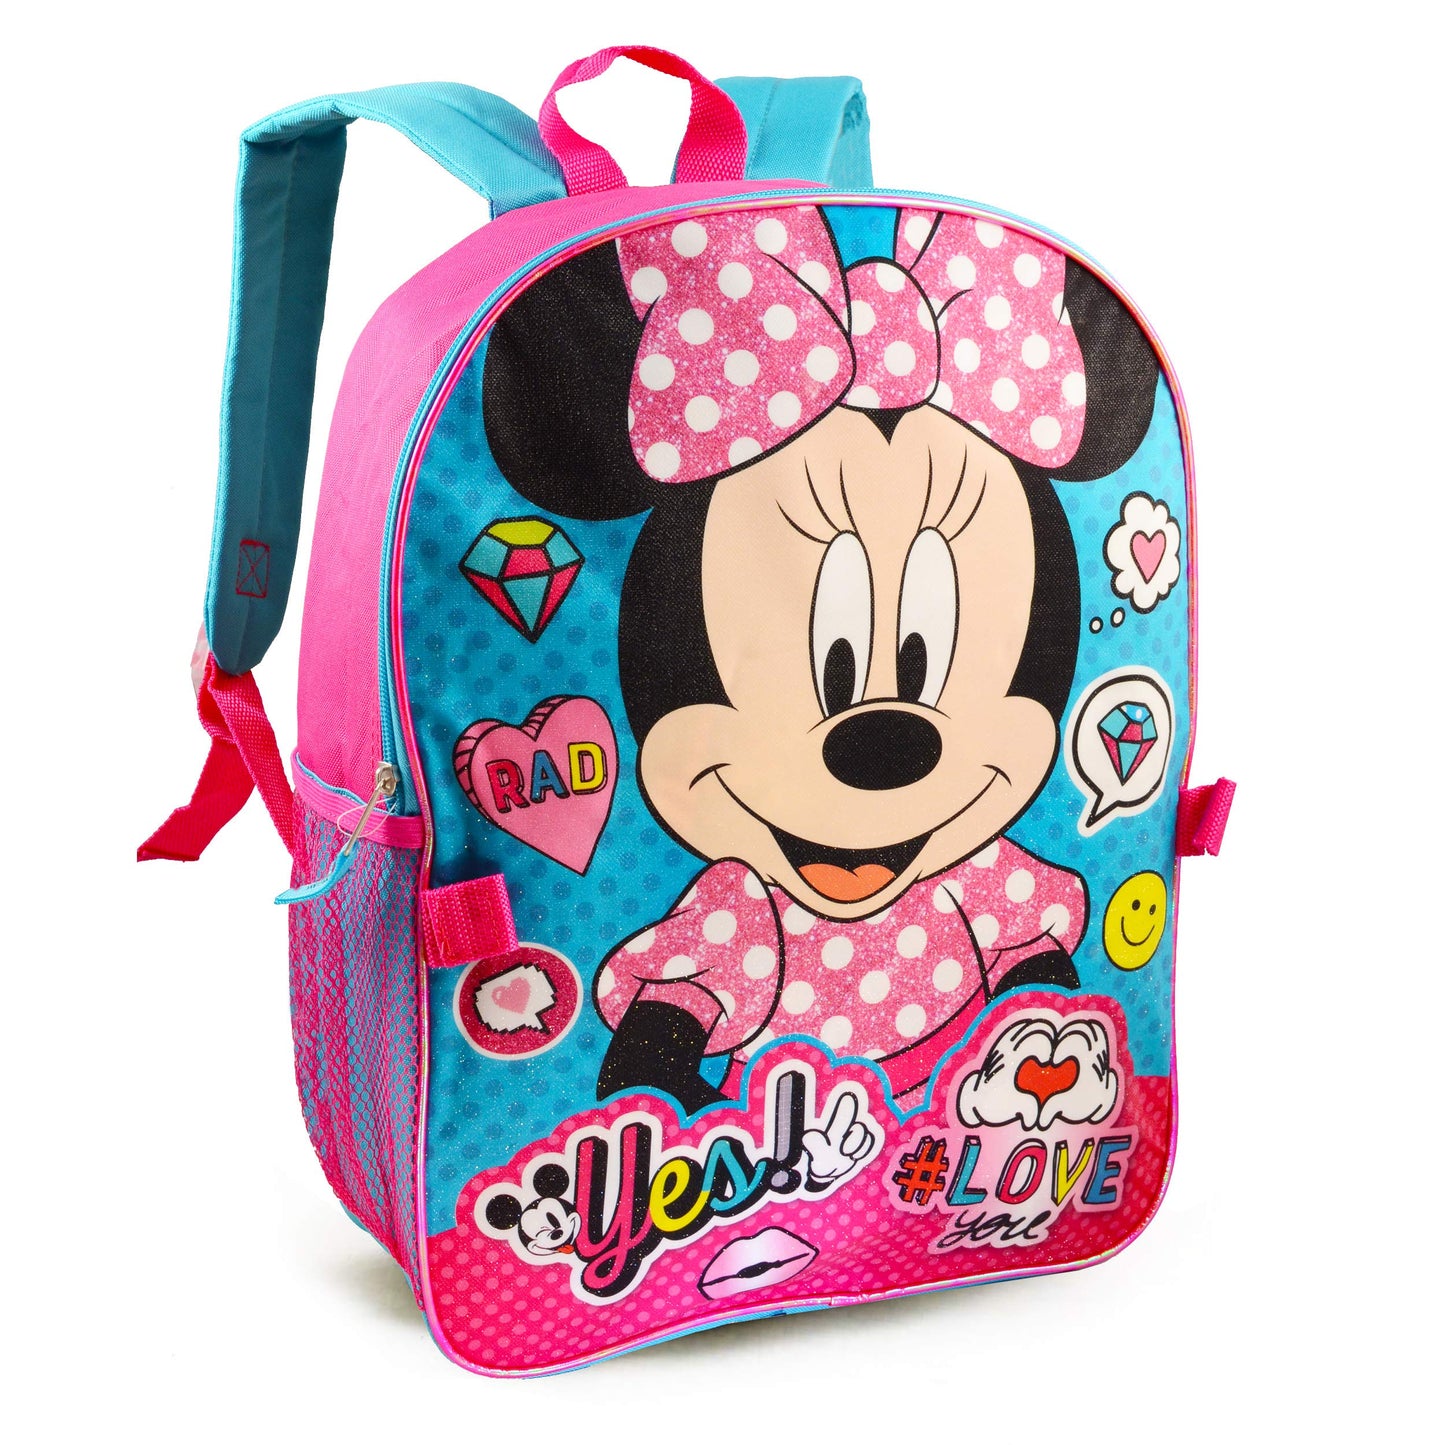 Disney Minnie Mouse Backpack with Lunch Box for Girls 5 Pc Bundle (Minnie Mouse School Supplies)